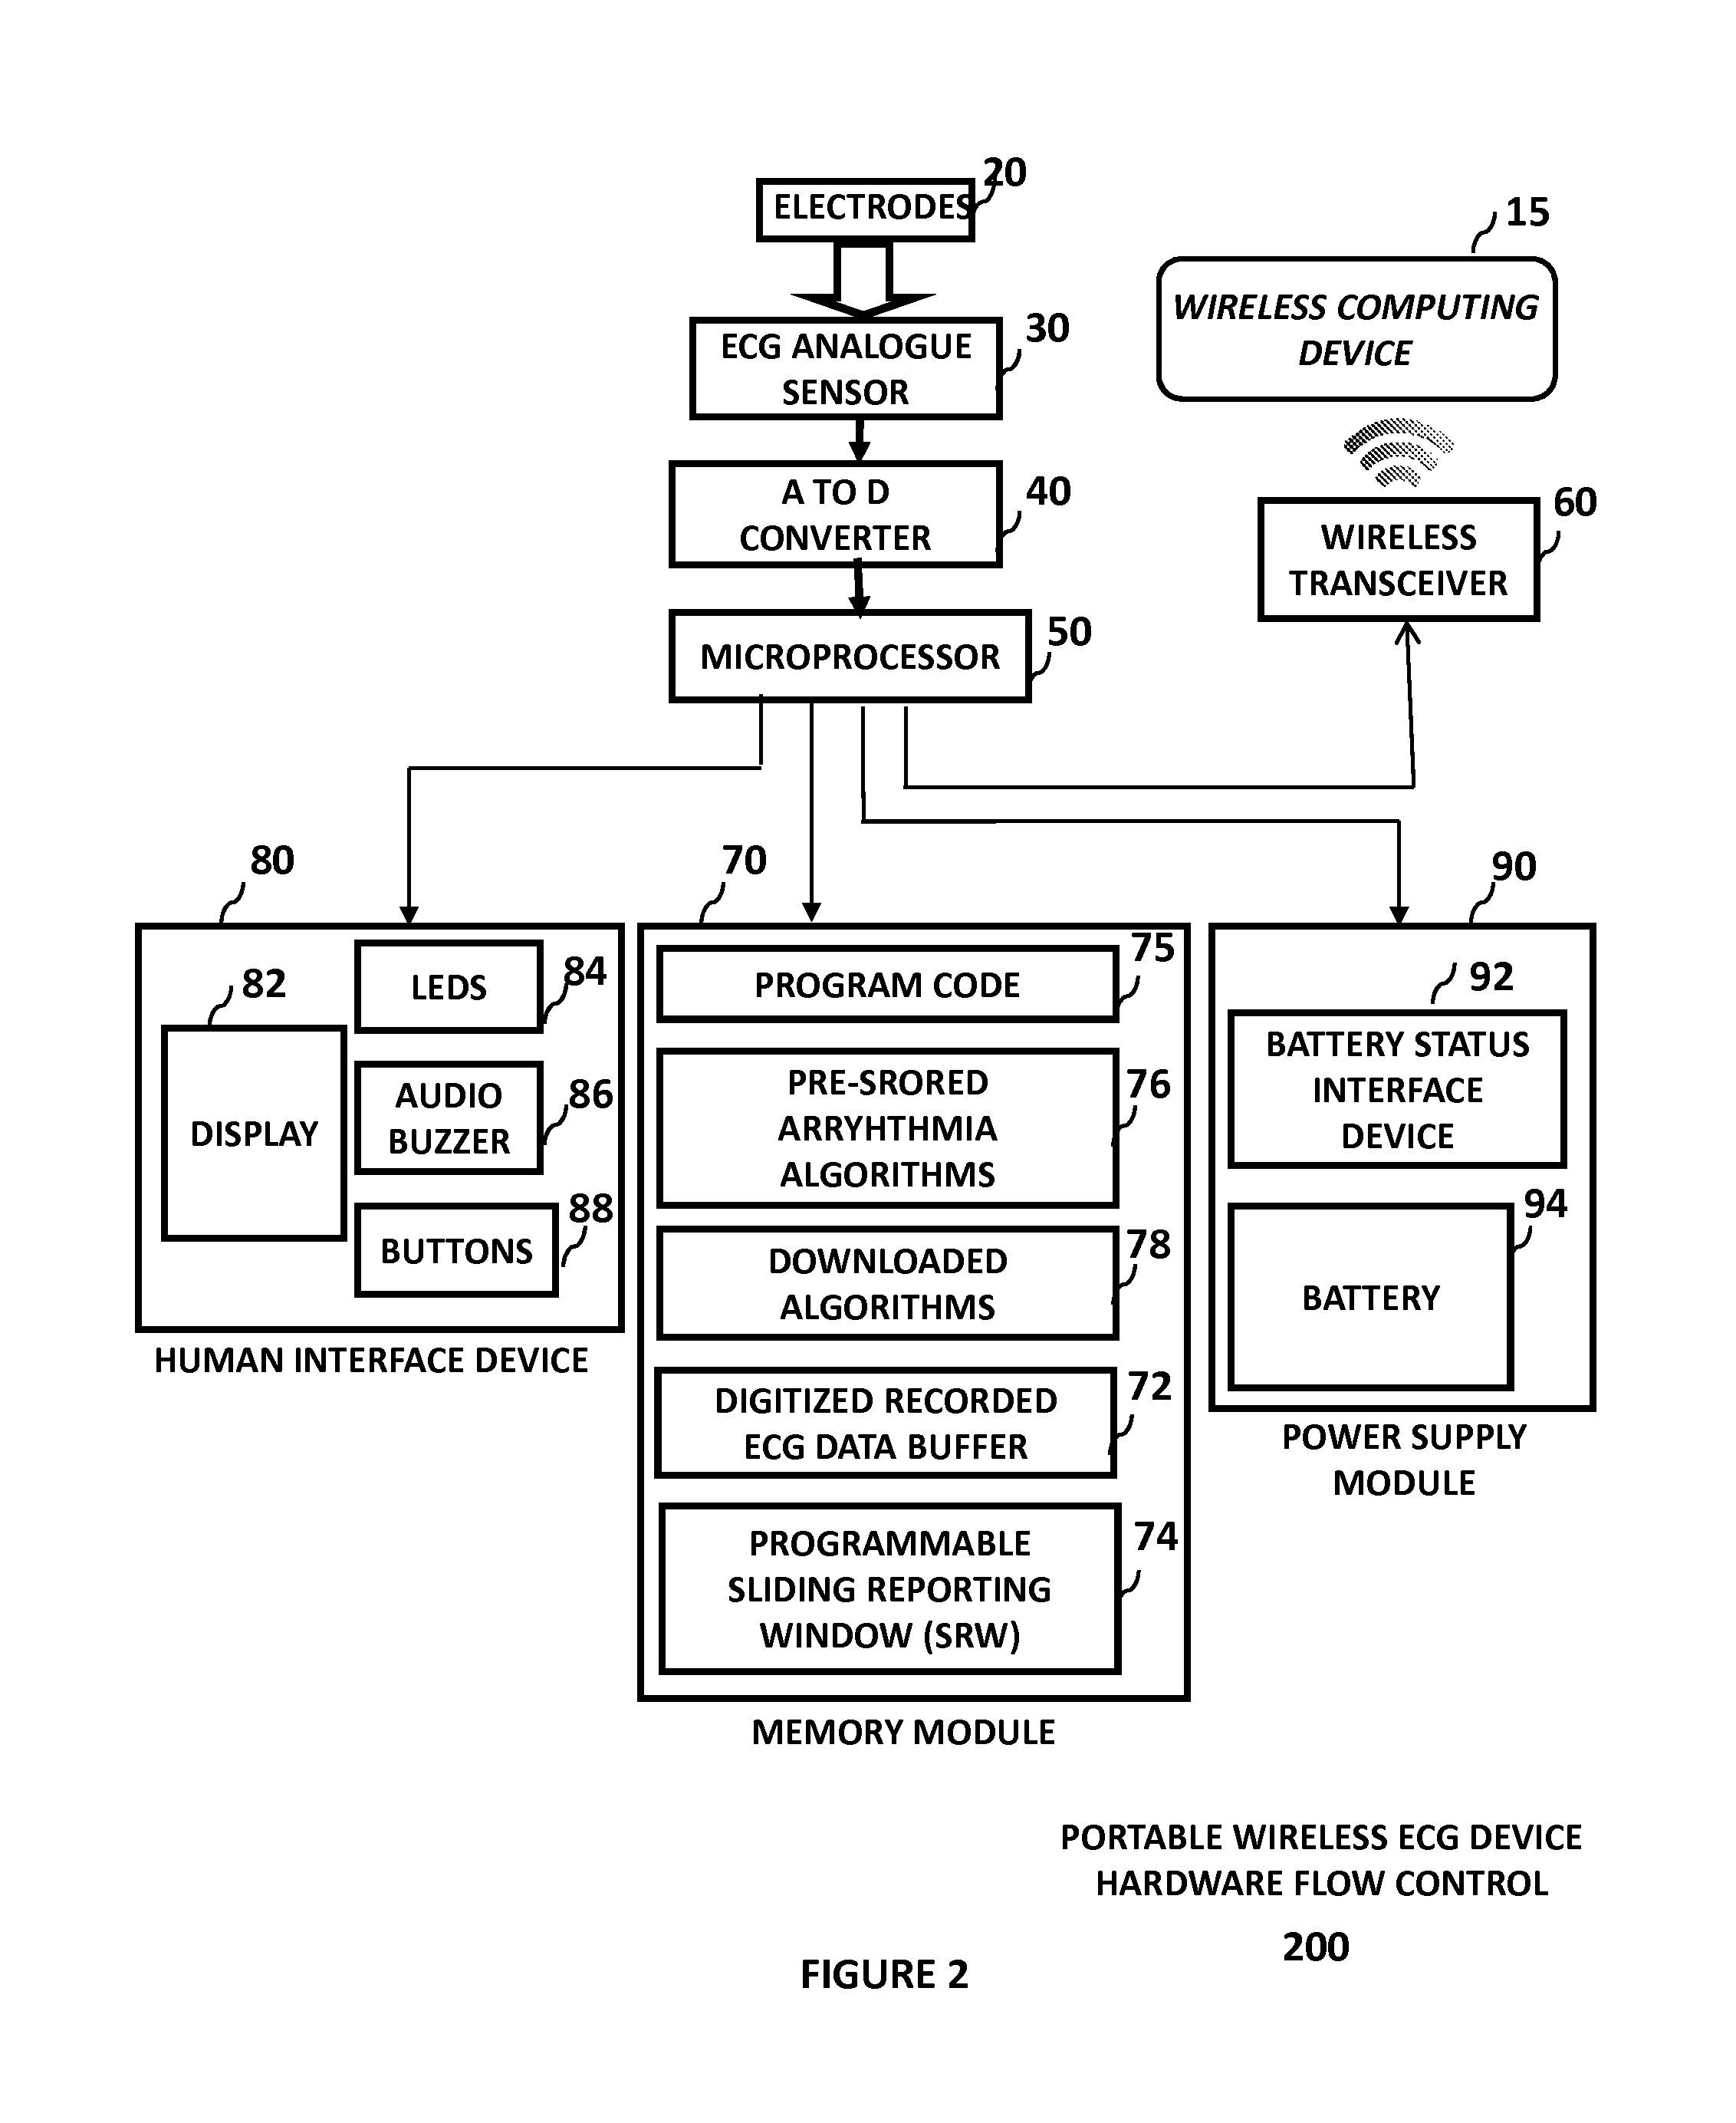 Method and apparatus for an interactively programmable ECG device with wireless communication interface to remote computing devices